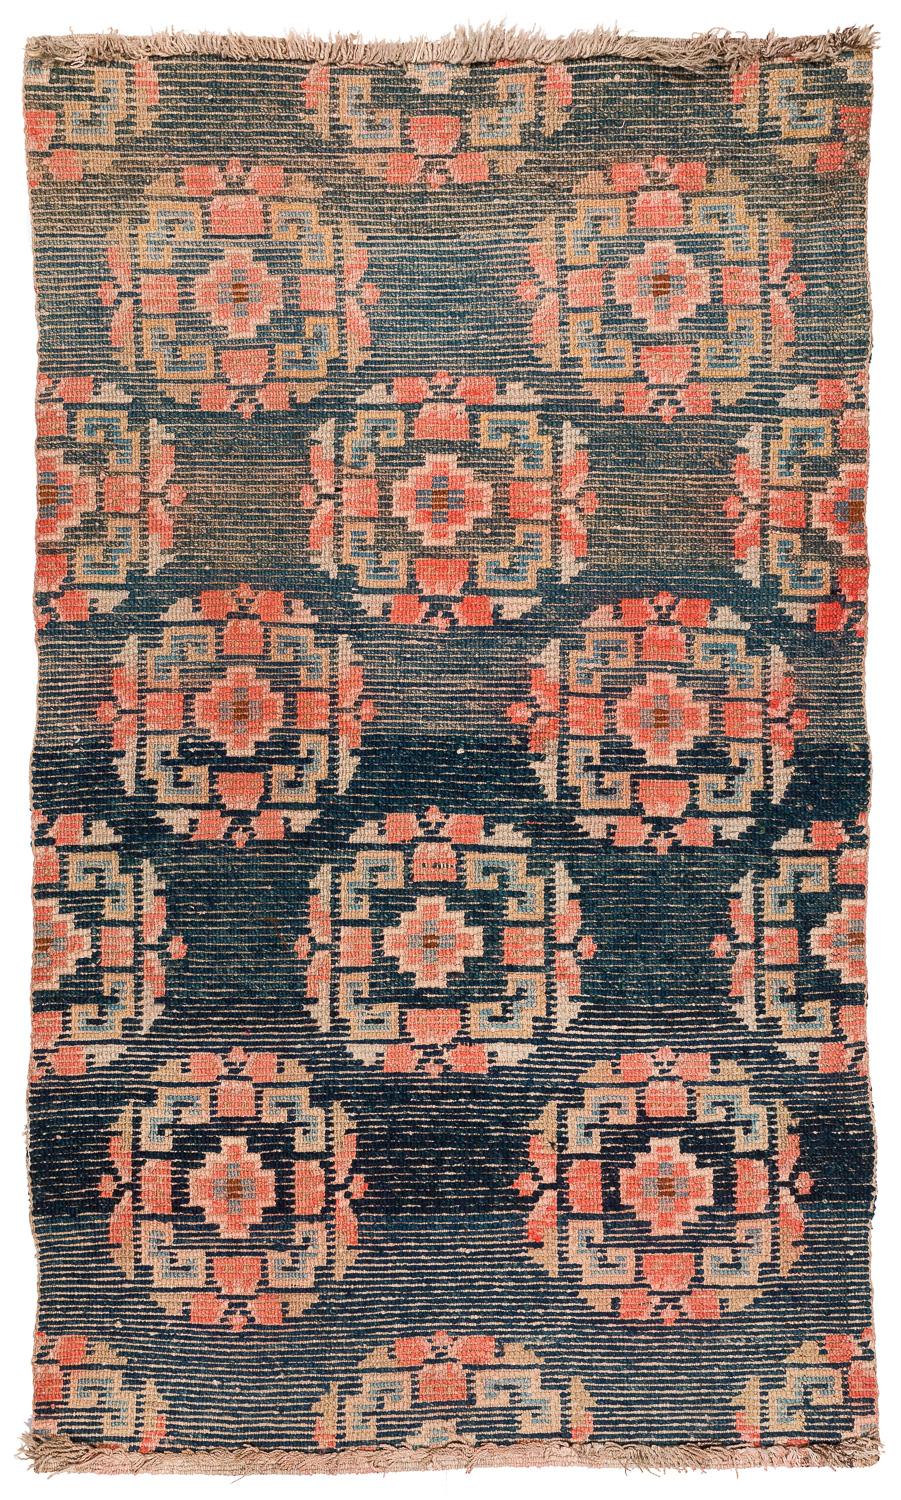 This antique Tibetan rug has very special wool, judging by its silky aspect this was woven with lambs wool. Lambs wool is reserved only for the most special carpets. The rug has magnificent indigo with lots of abrash color variation. All colors are